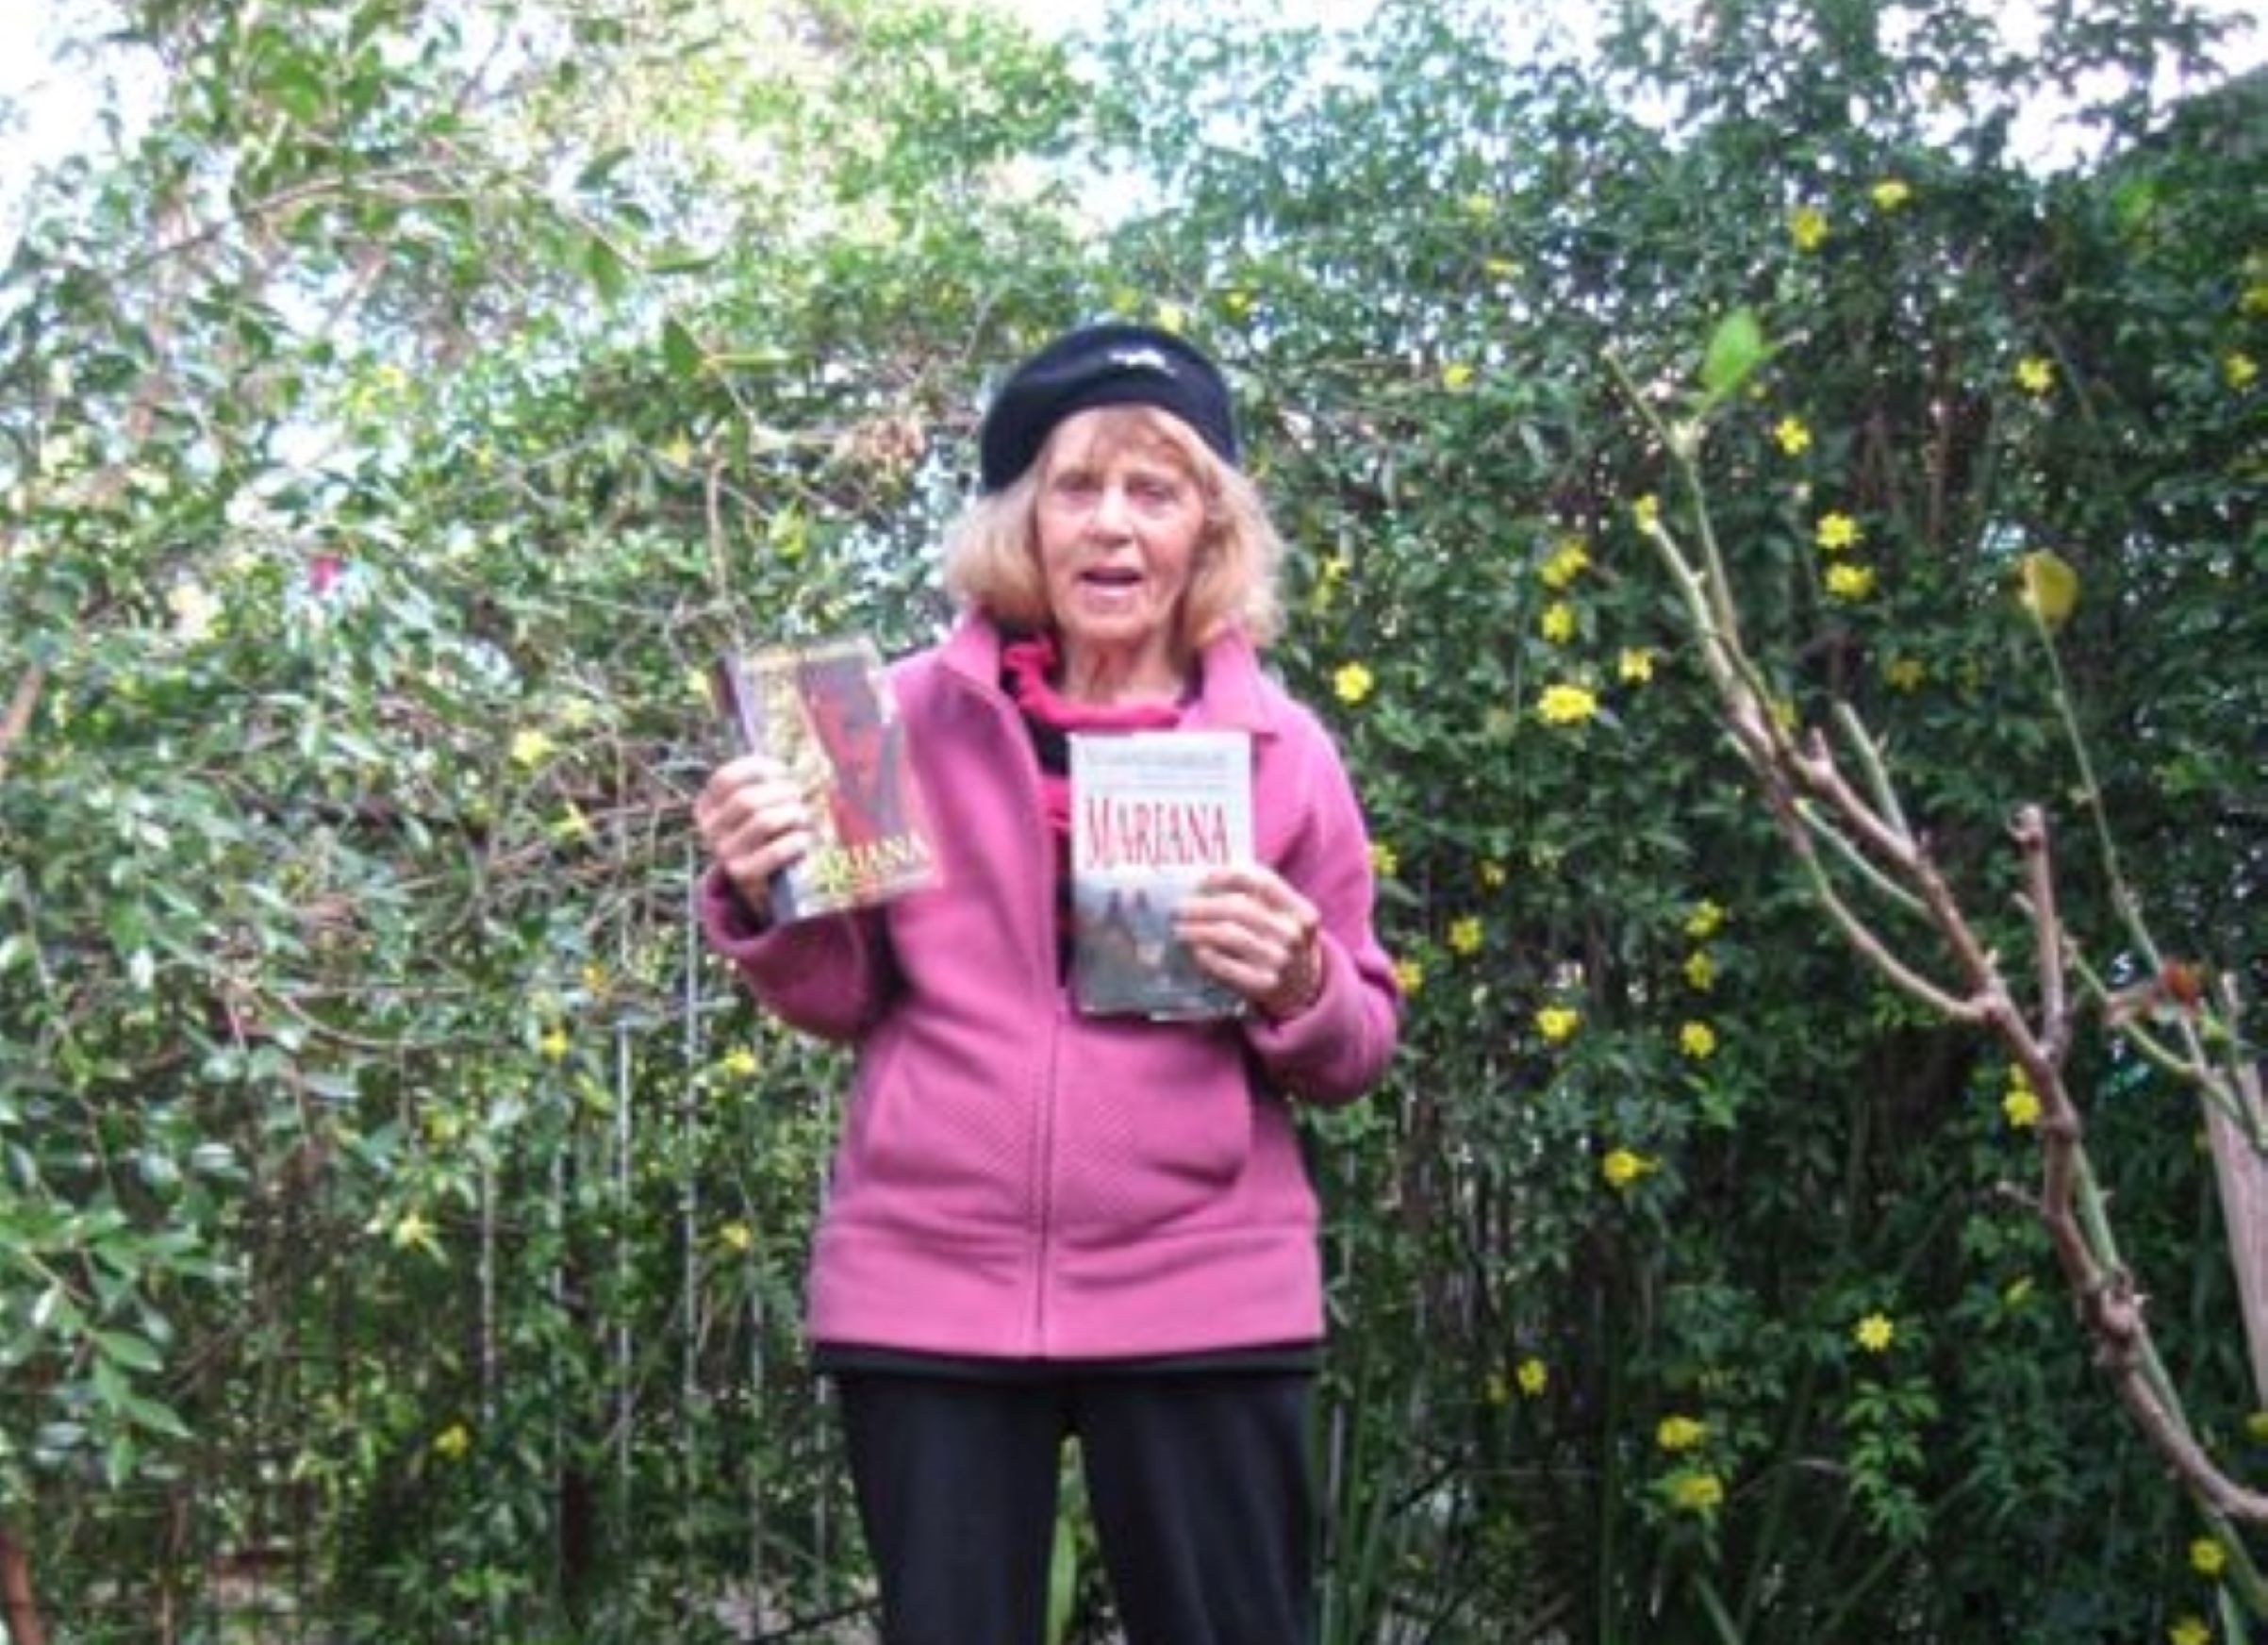 Thelma Daw stands in her garden in Australia holding two copies of Susanna Kearlsey's book Mariana. She is wearing a pink shirt and a jaunty cap.